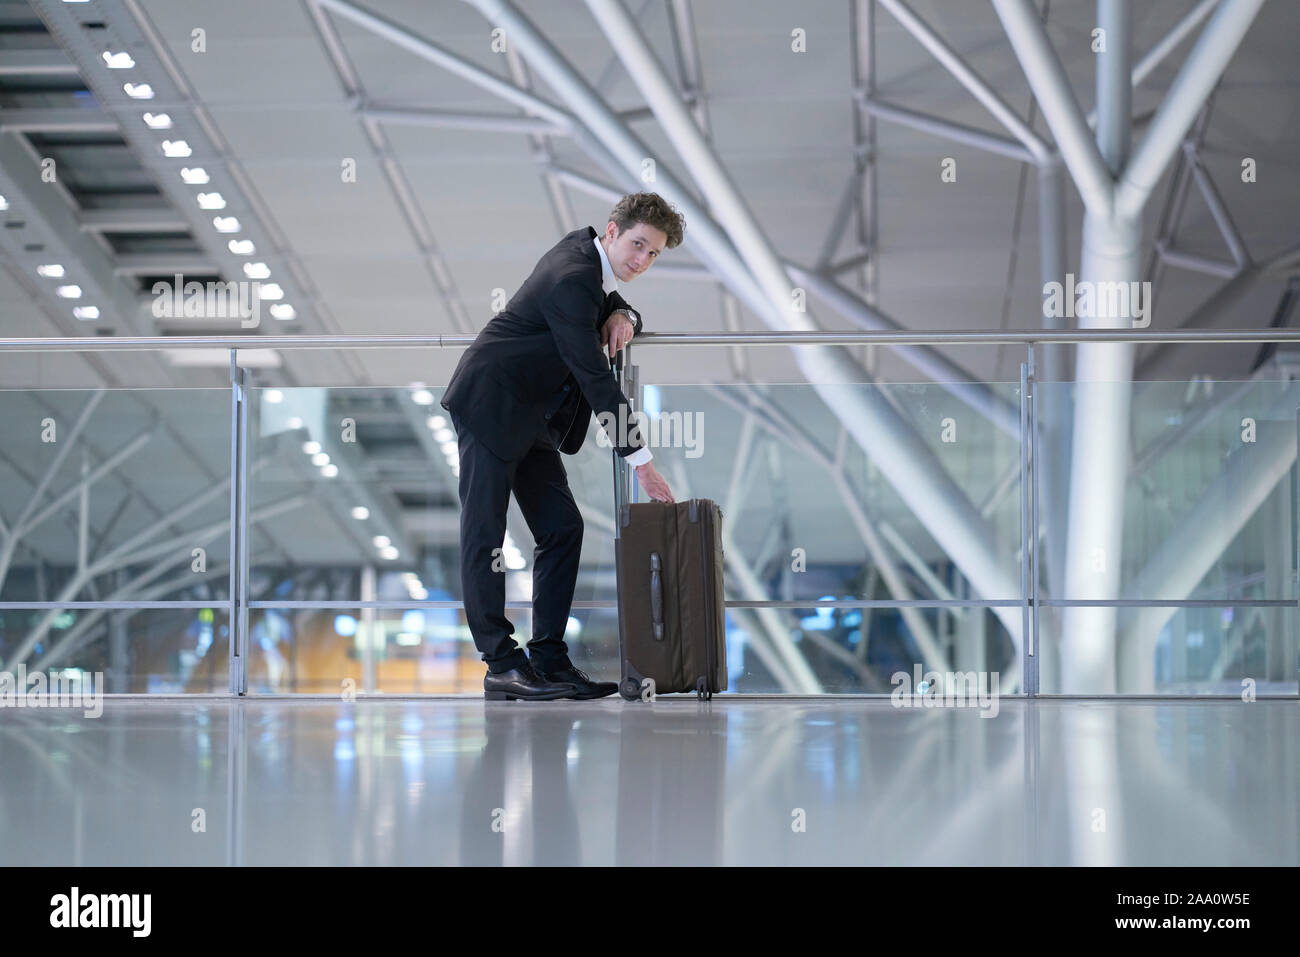 Young handsome businessman wearing a suit standing at the glass guard railing inside an airport with his hands at his rolling suitcase Stock Photo